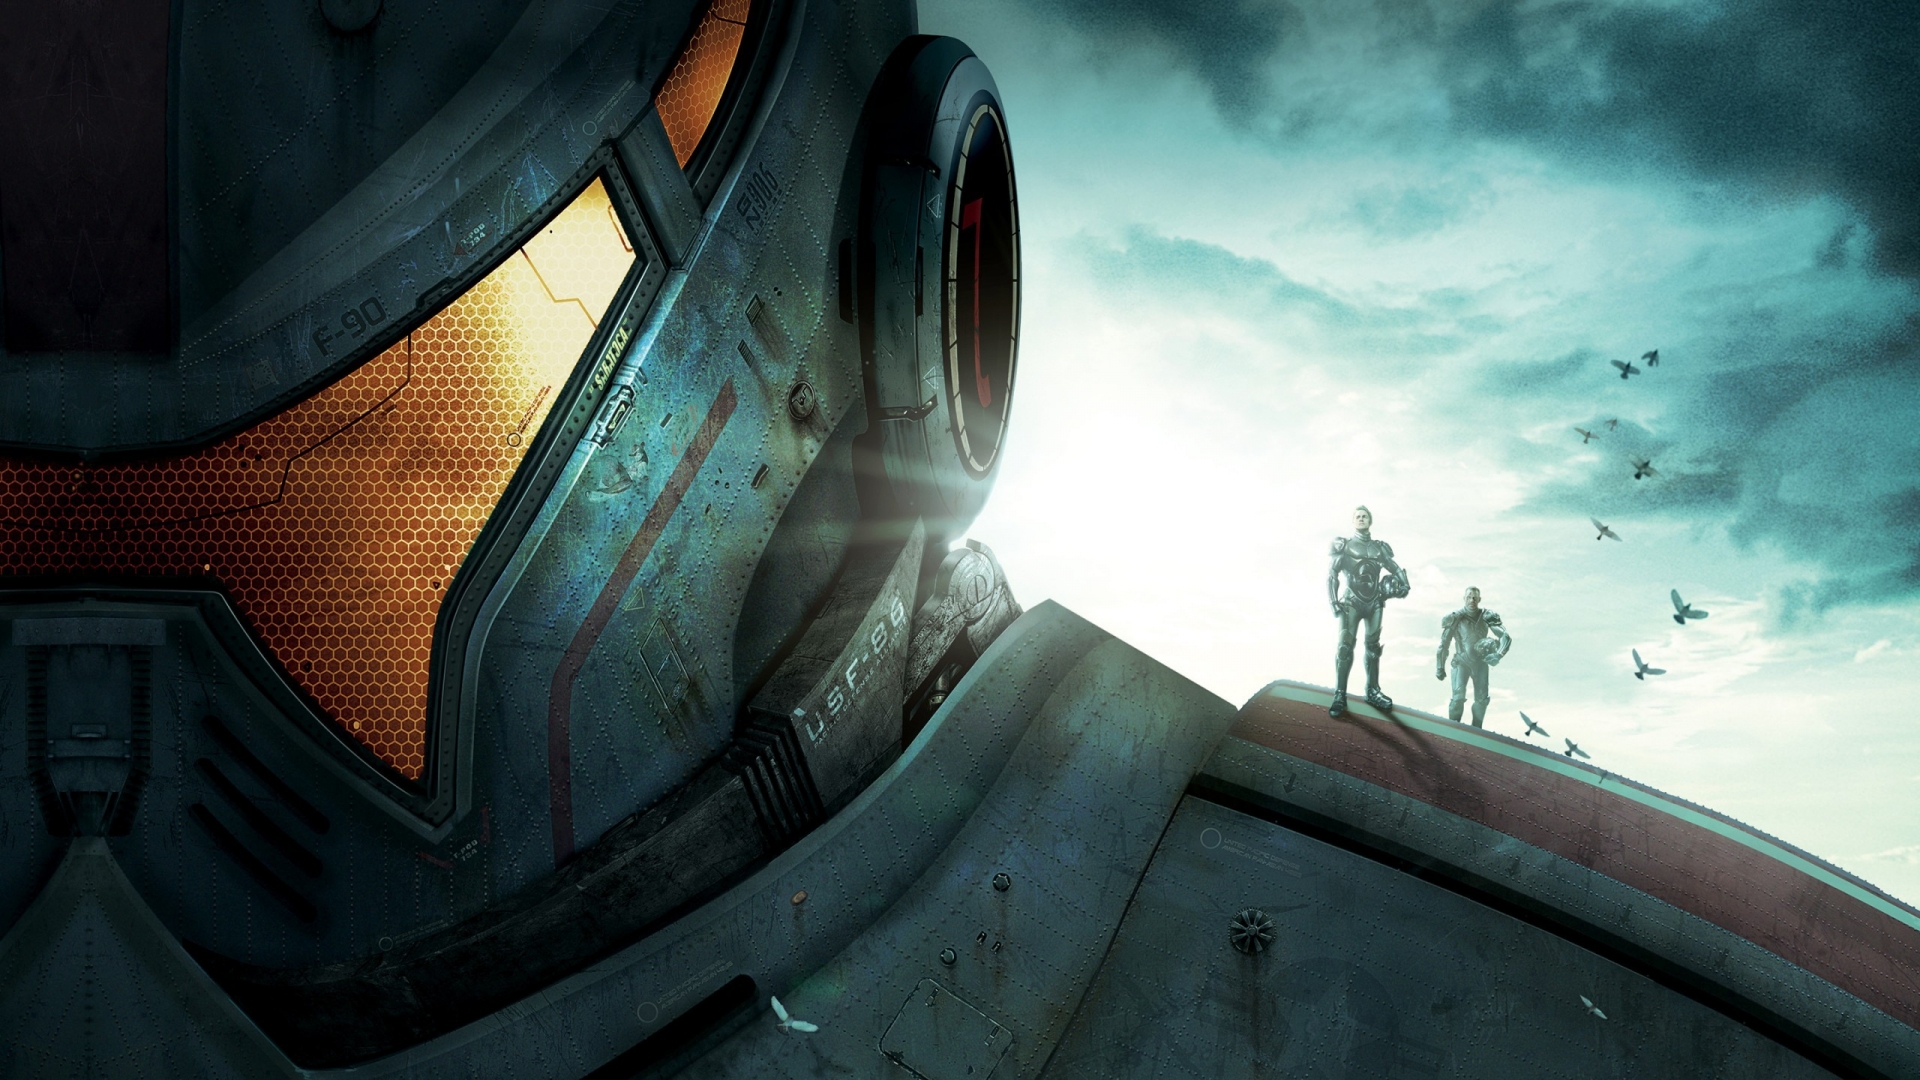 Pacific Rim Film Poster for 1920 x 1080 HDTV 1080p resolution